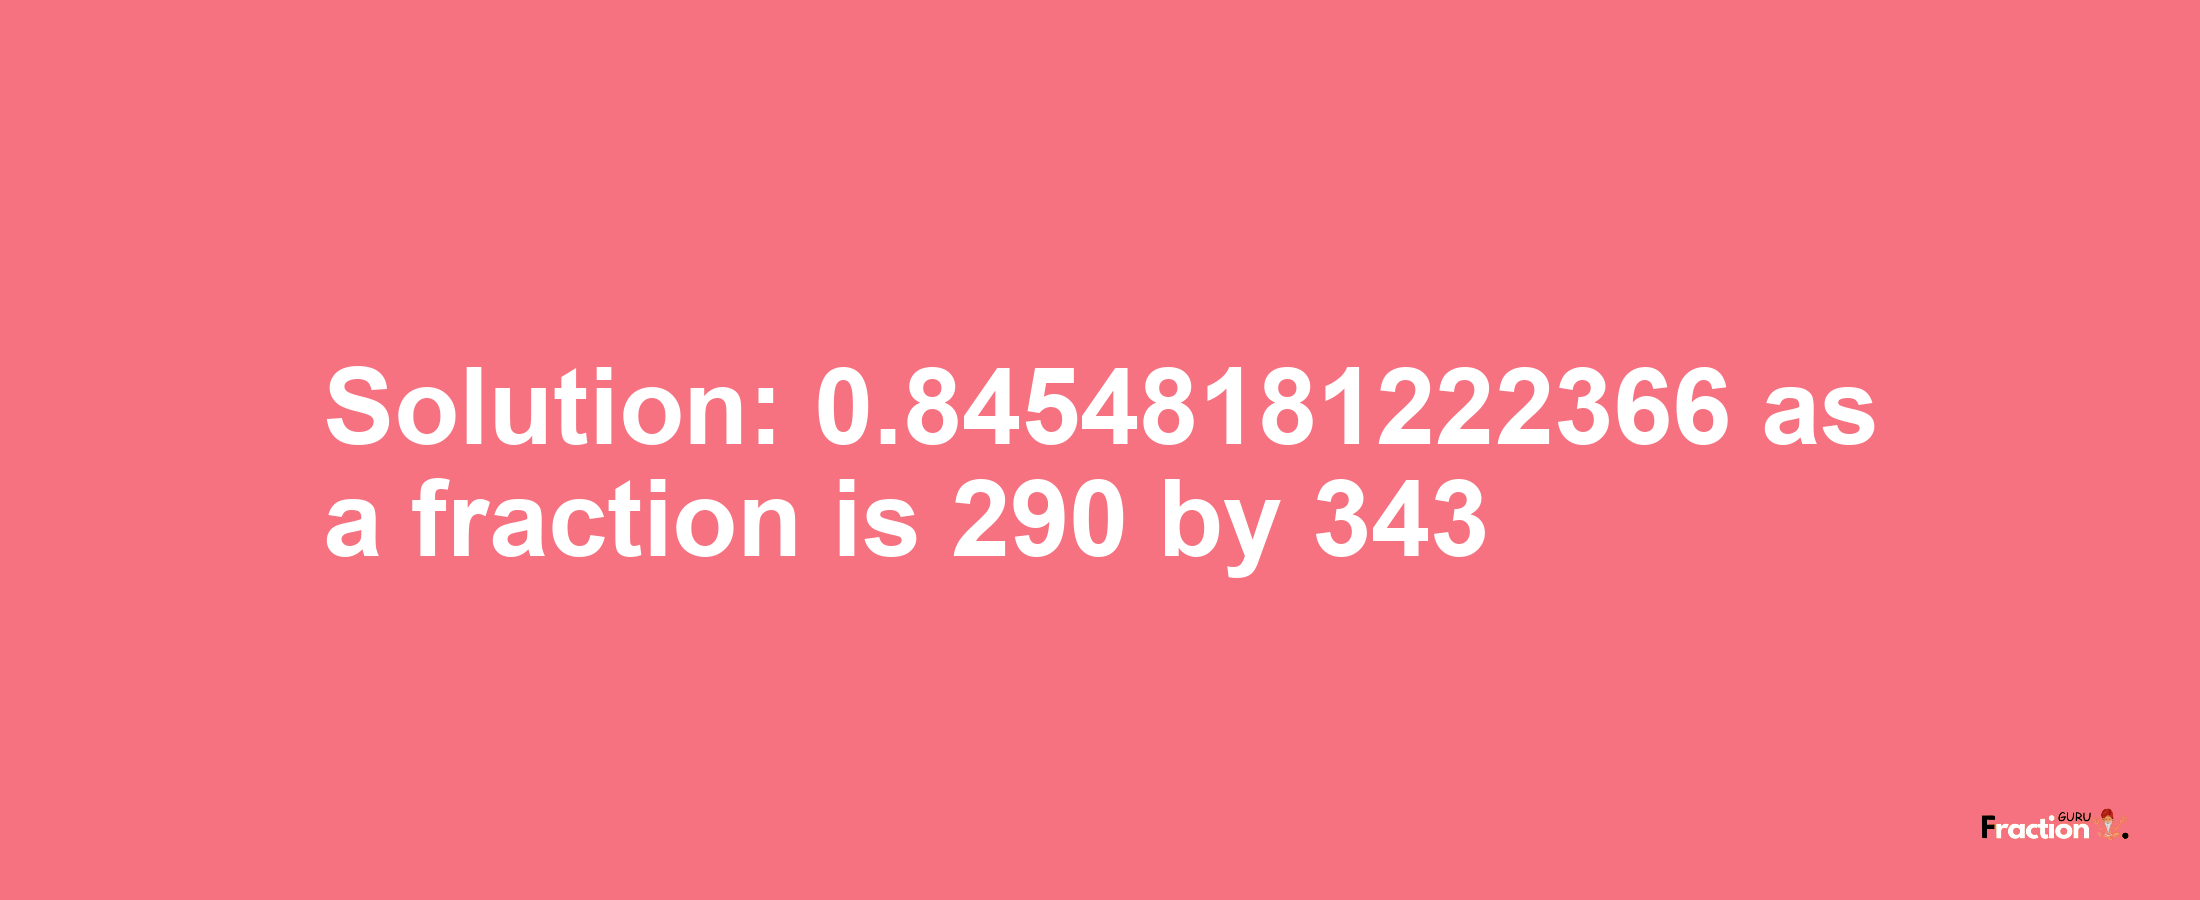 Solution:0.84548181222366 as a fraction is 290/343